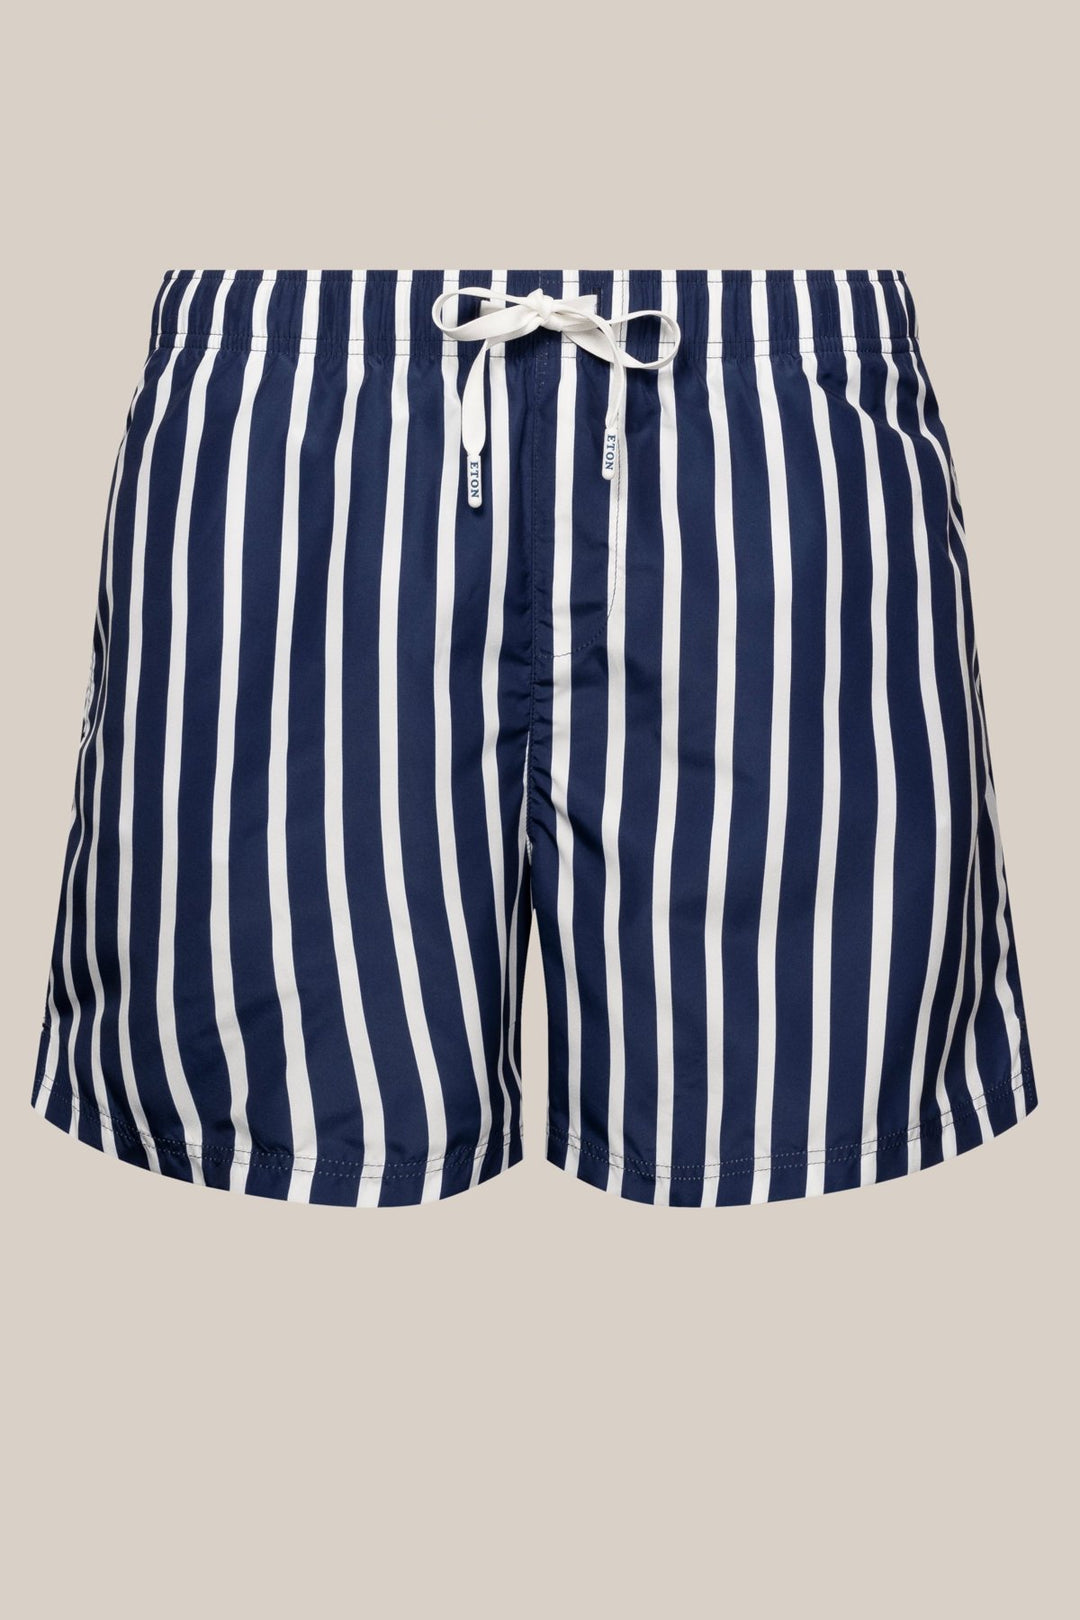 Navy striped swimsuit